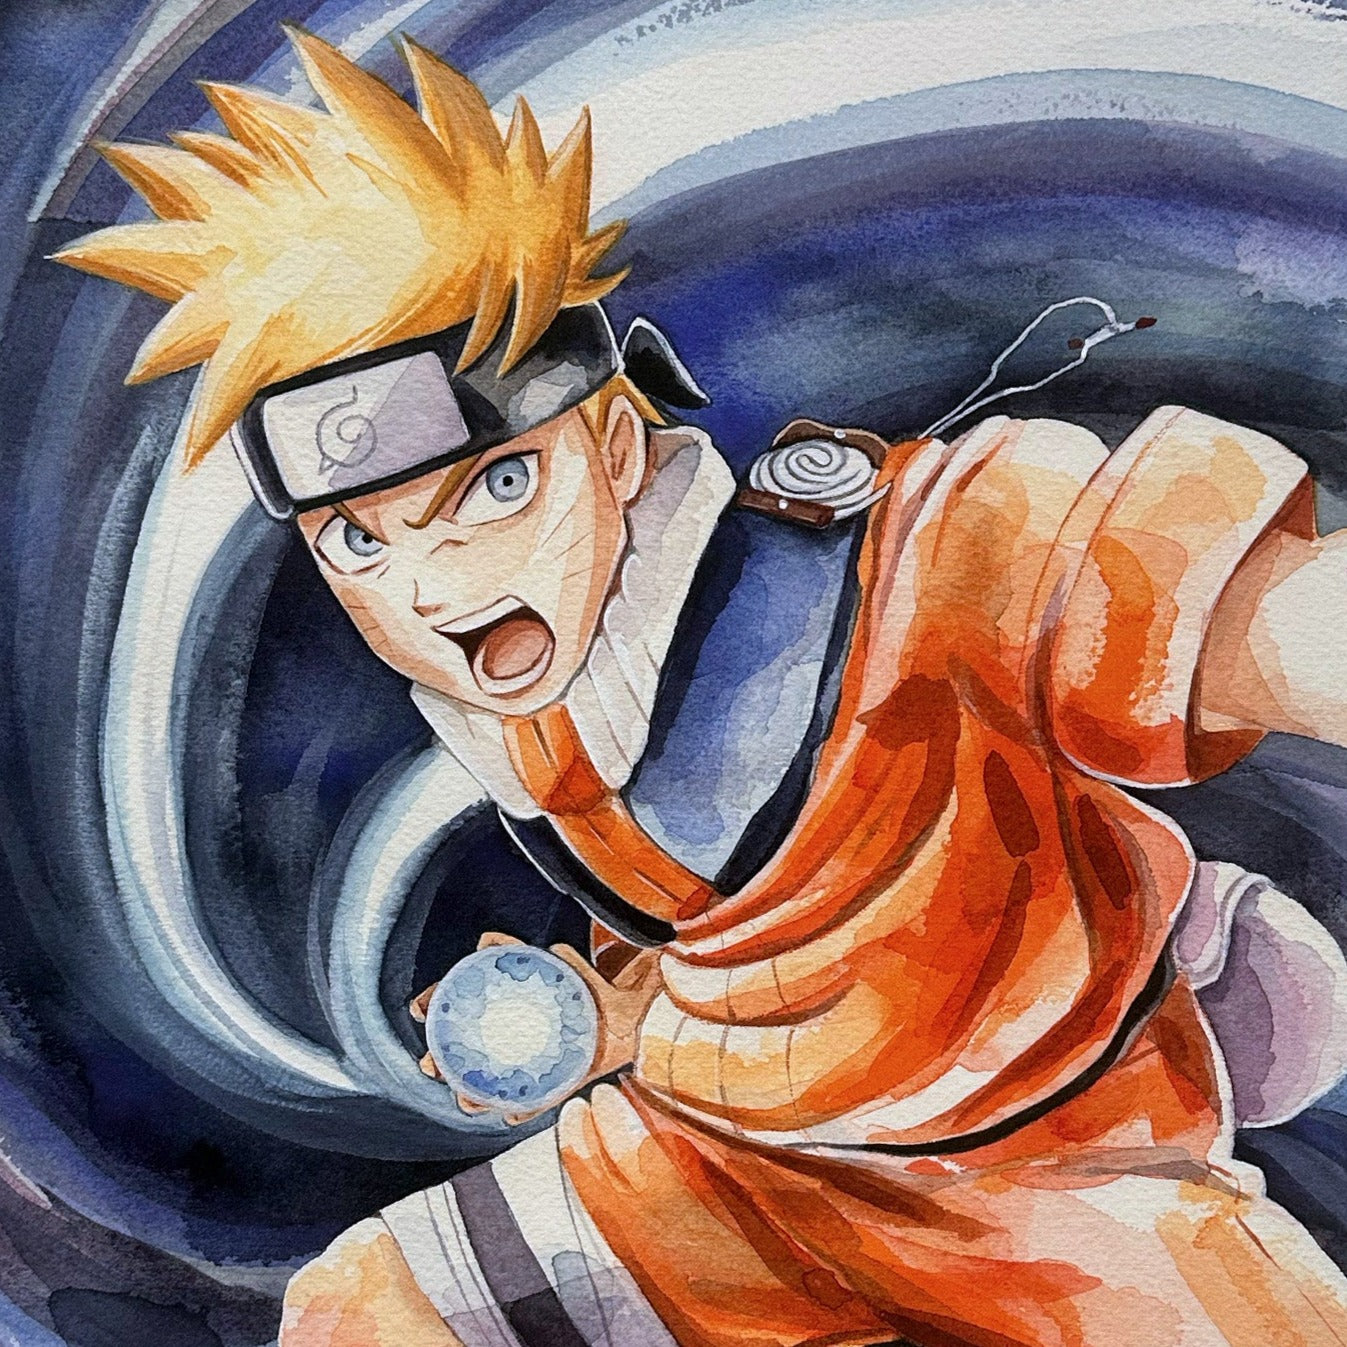 Do you guys think the rasengan ruined the drawing 😭 : r/Naruto